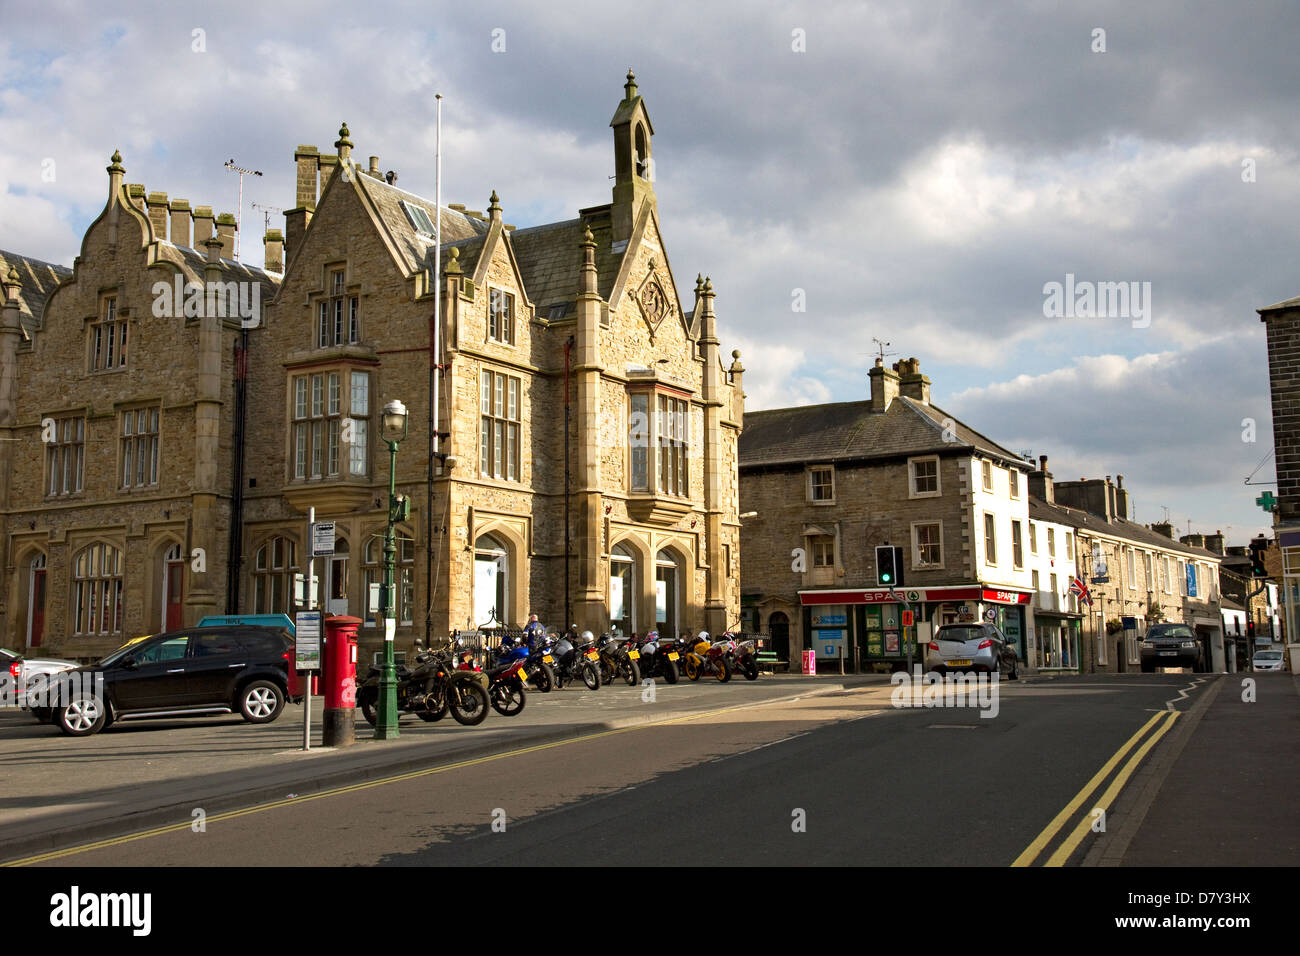 Town Hall building,  Market Square, Settle, Ribblesdale, Yorkshire Dales, North Yorkshire, England, UK Stock Photo